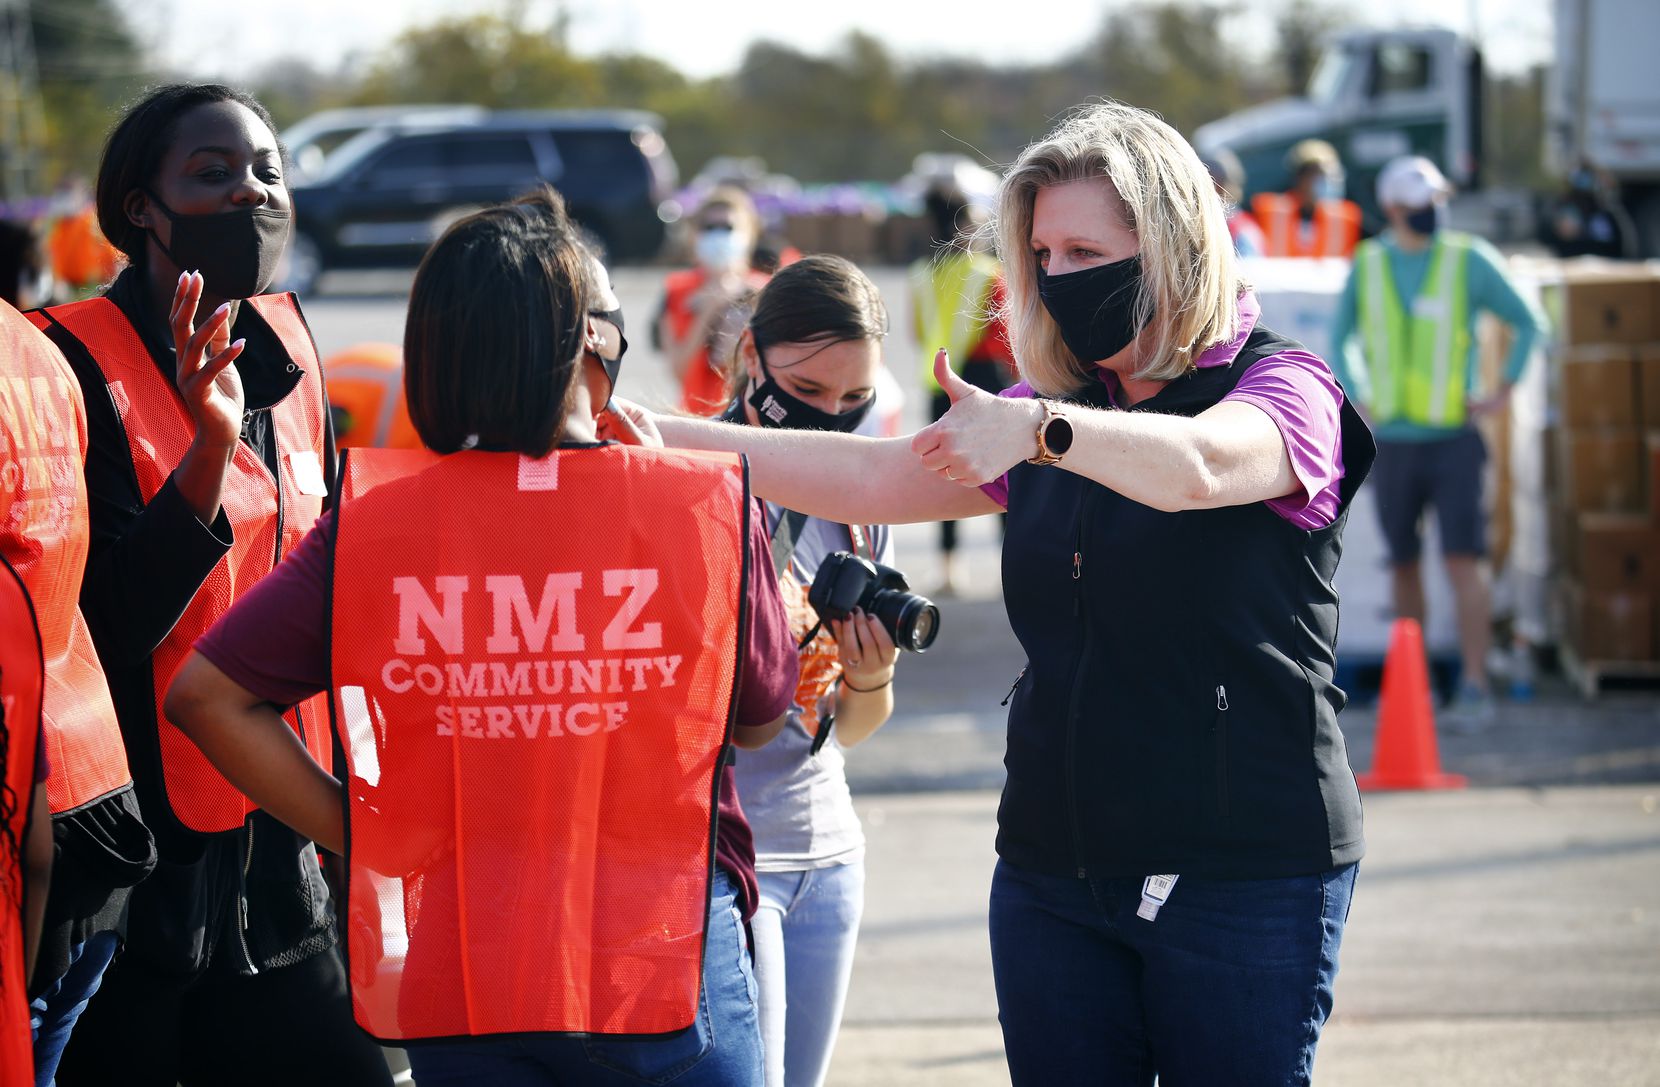 North Texas Food Bank CEO Trisha Cunningham (right) gives a thumbs up to volunteers Brittany Kennedy (left) and Lacy Ware (center) as they distributed food to families lined up at Fair Park in Dallas in November. 